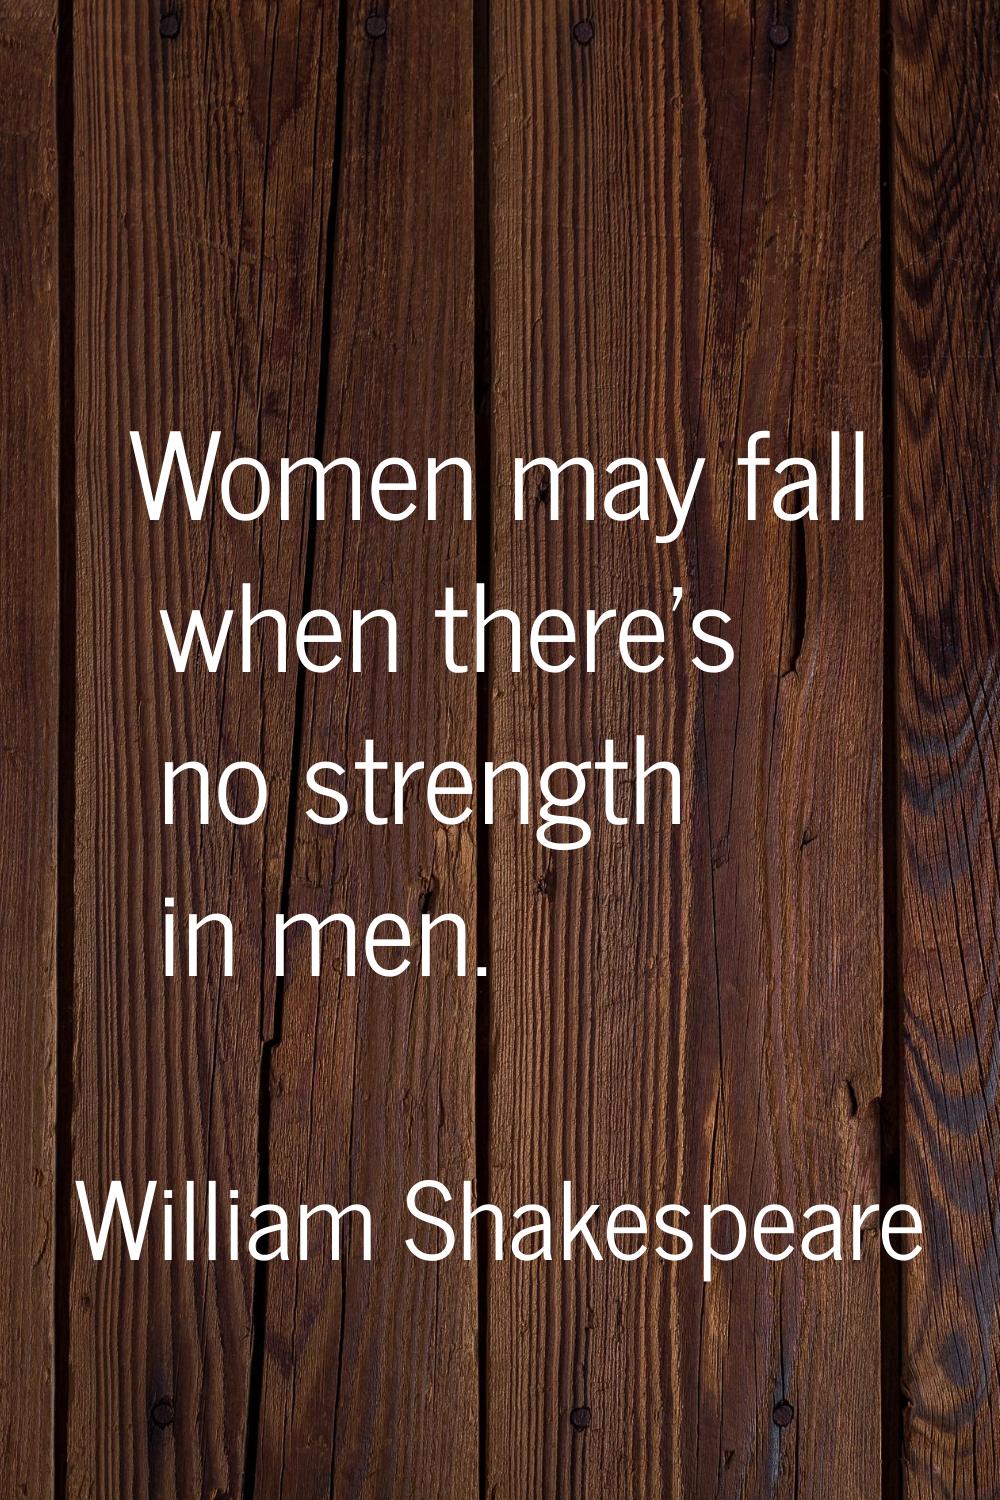 Women may fall when there's no strength in men.